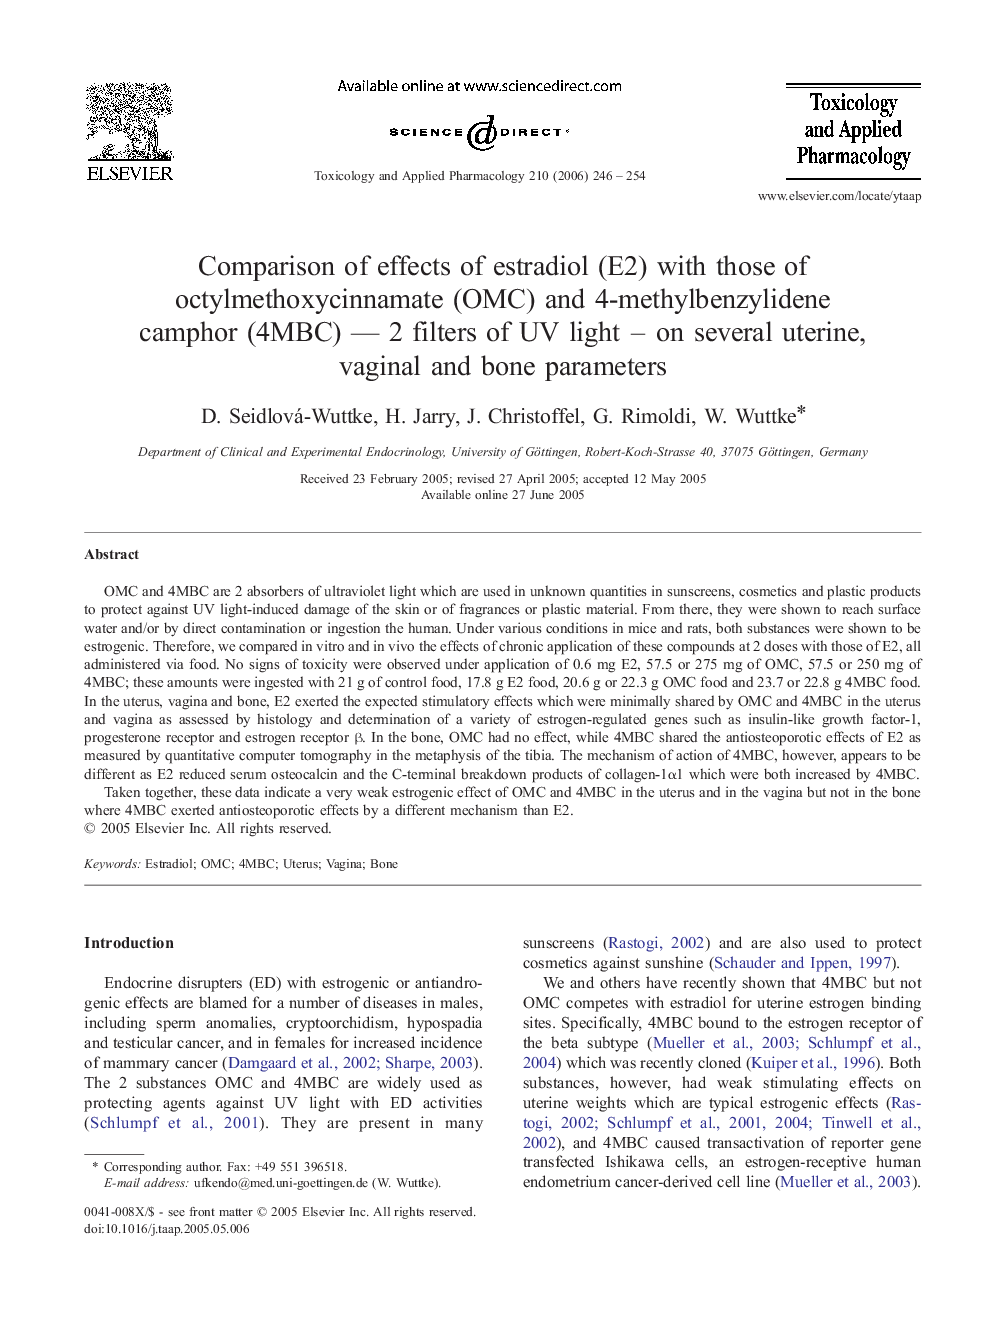 Comparison of effects of estradiol (E2) with those of octylmethoxycinnamate (OMC) and 4-methylbenzylidene camphor (4MBC) - 2 filters of UV light - on several uterine, vaginal and bone parameters